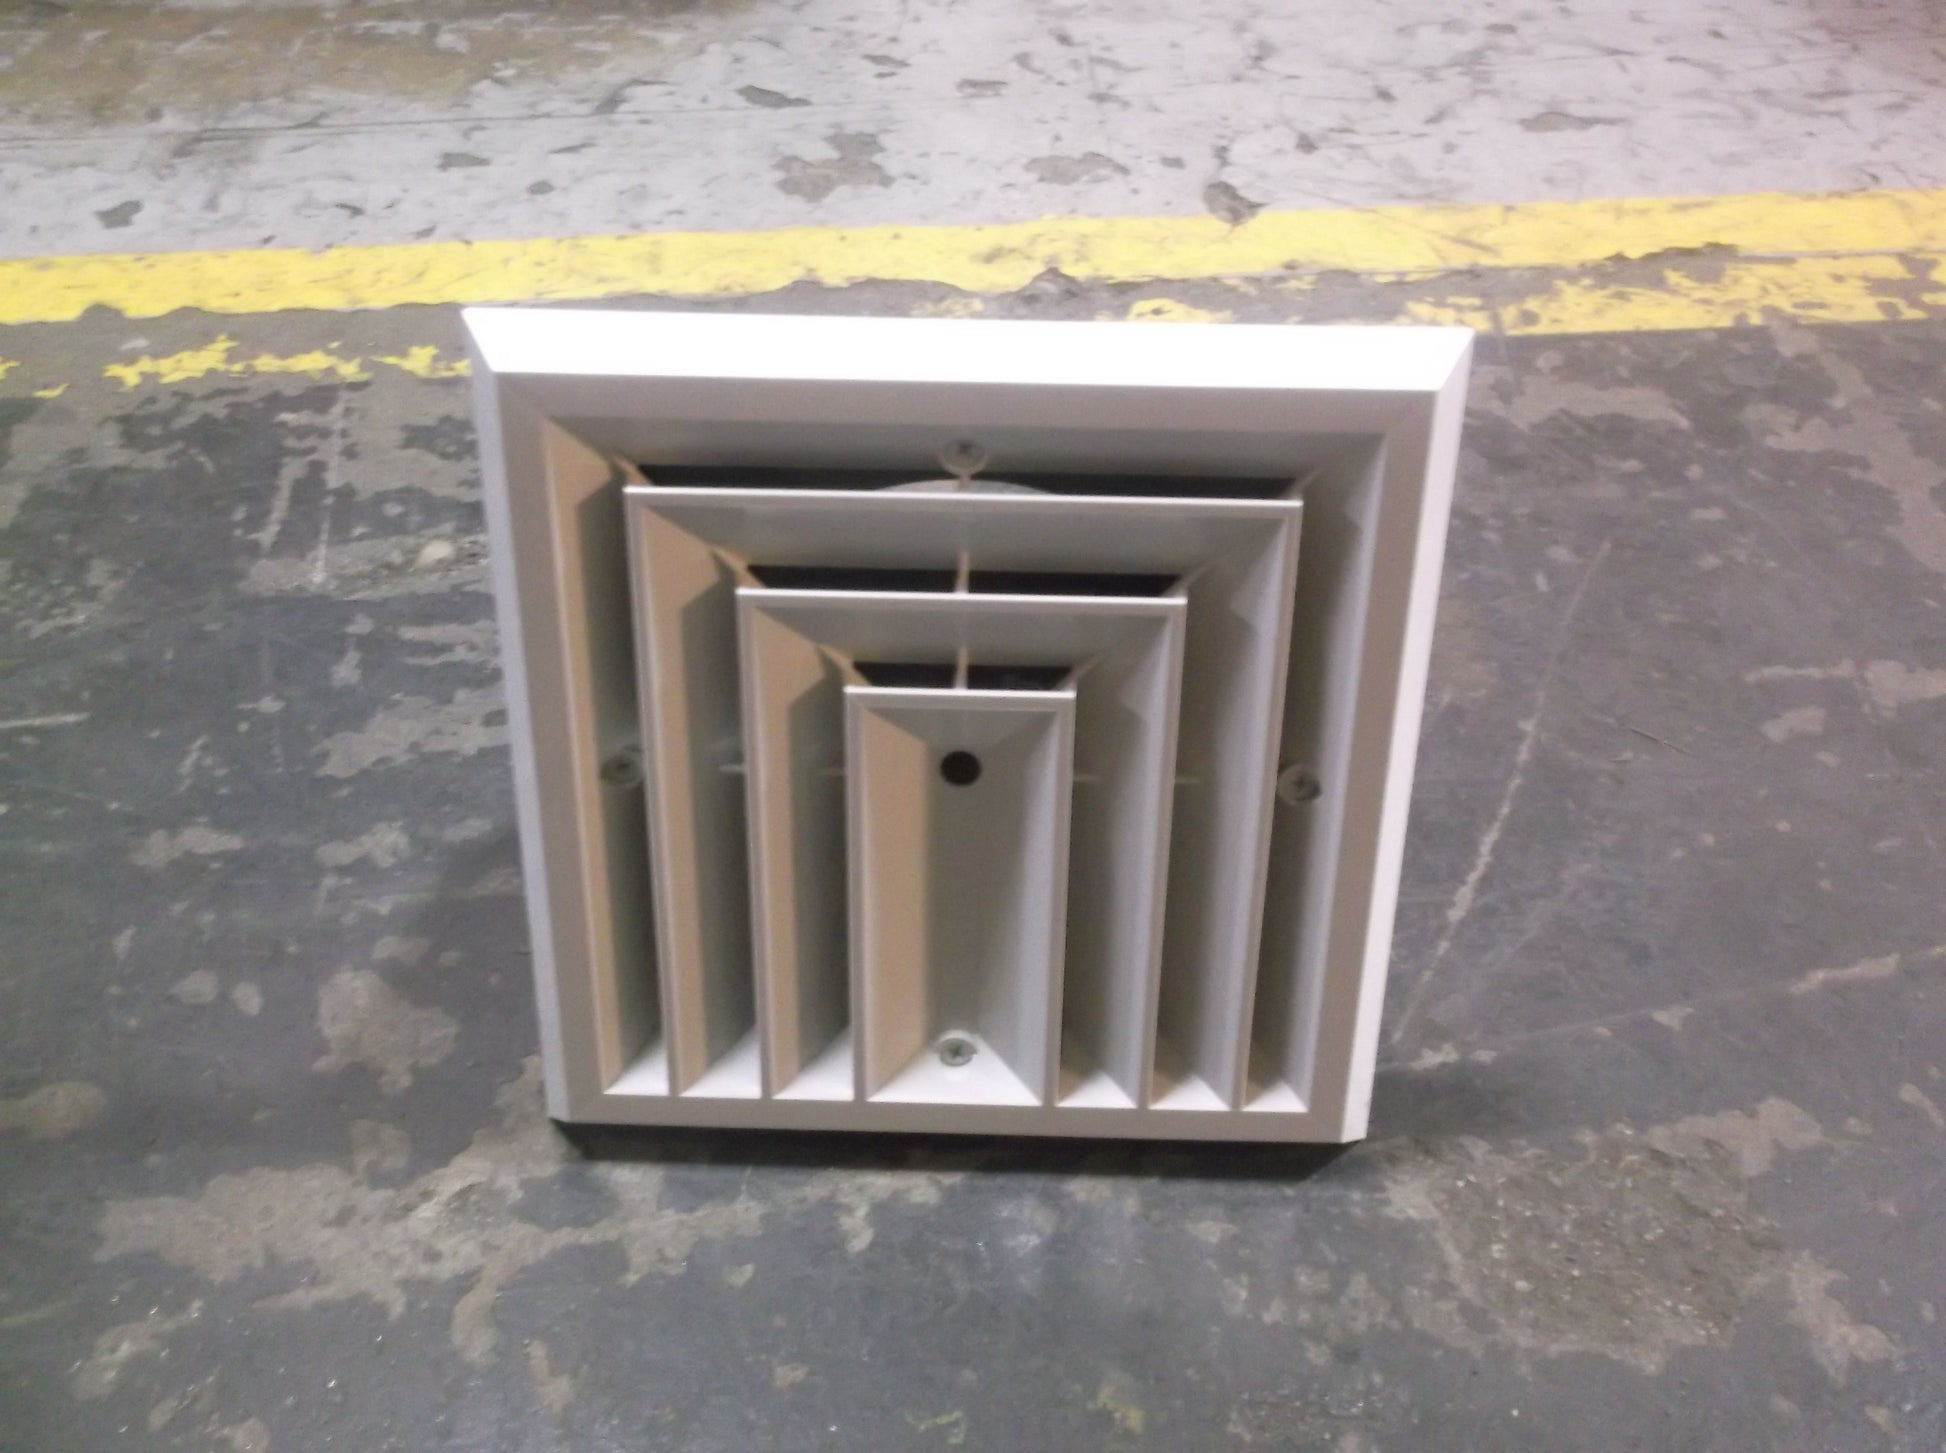 6" X 6" DIFFUSER, 3 WAY GRILLE WITH STEPPED COLLAR 